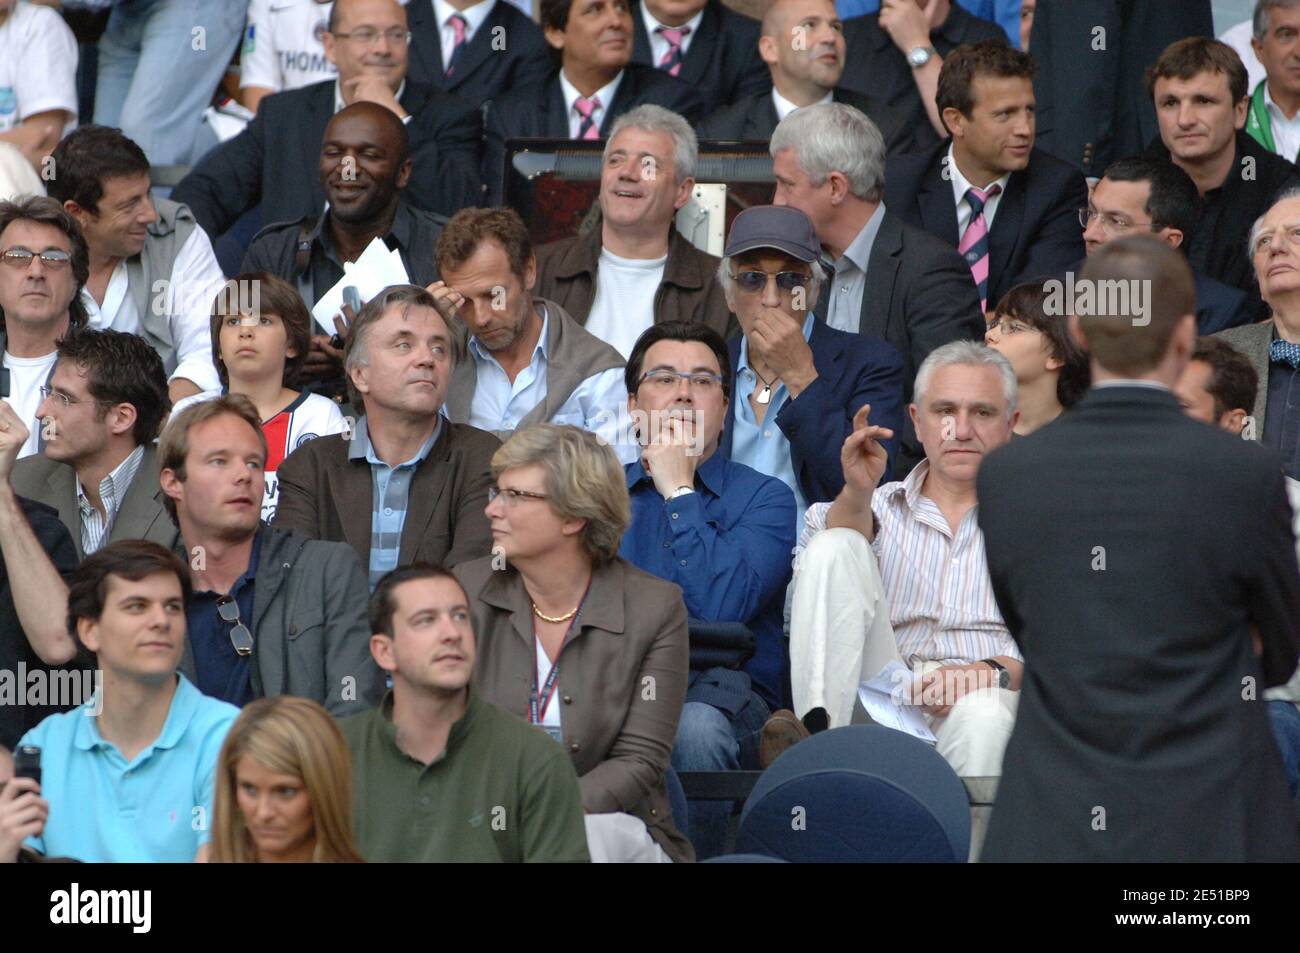 Patrick Bruel, Francois Cluzet and Gerard Darmon attend the French First League Soccer match, Paris Saint-Germain vs aS Saint-Etienne at the Parc des Princes stadium in Paris, France on May 10, 2008. The match ended in a 1-1 draw. Photo by Phong Pham Cao/Cameleon/ABACAPRESS.COM Stock Photo